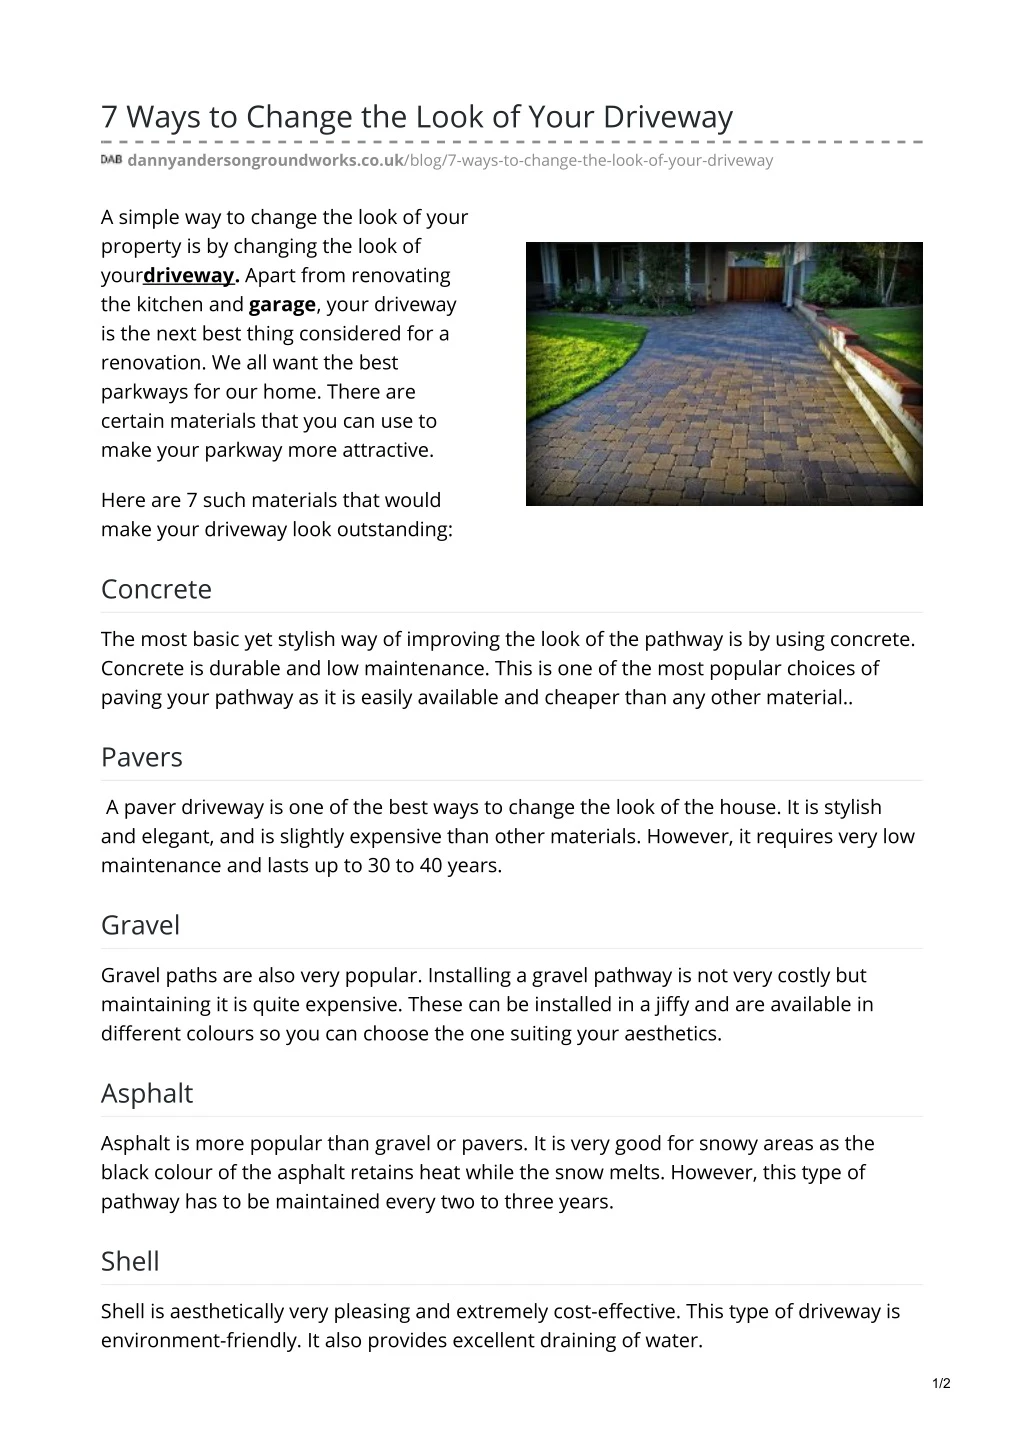 7 ways to change the look of your driveway